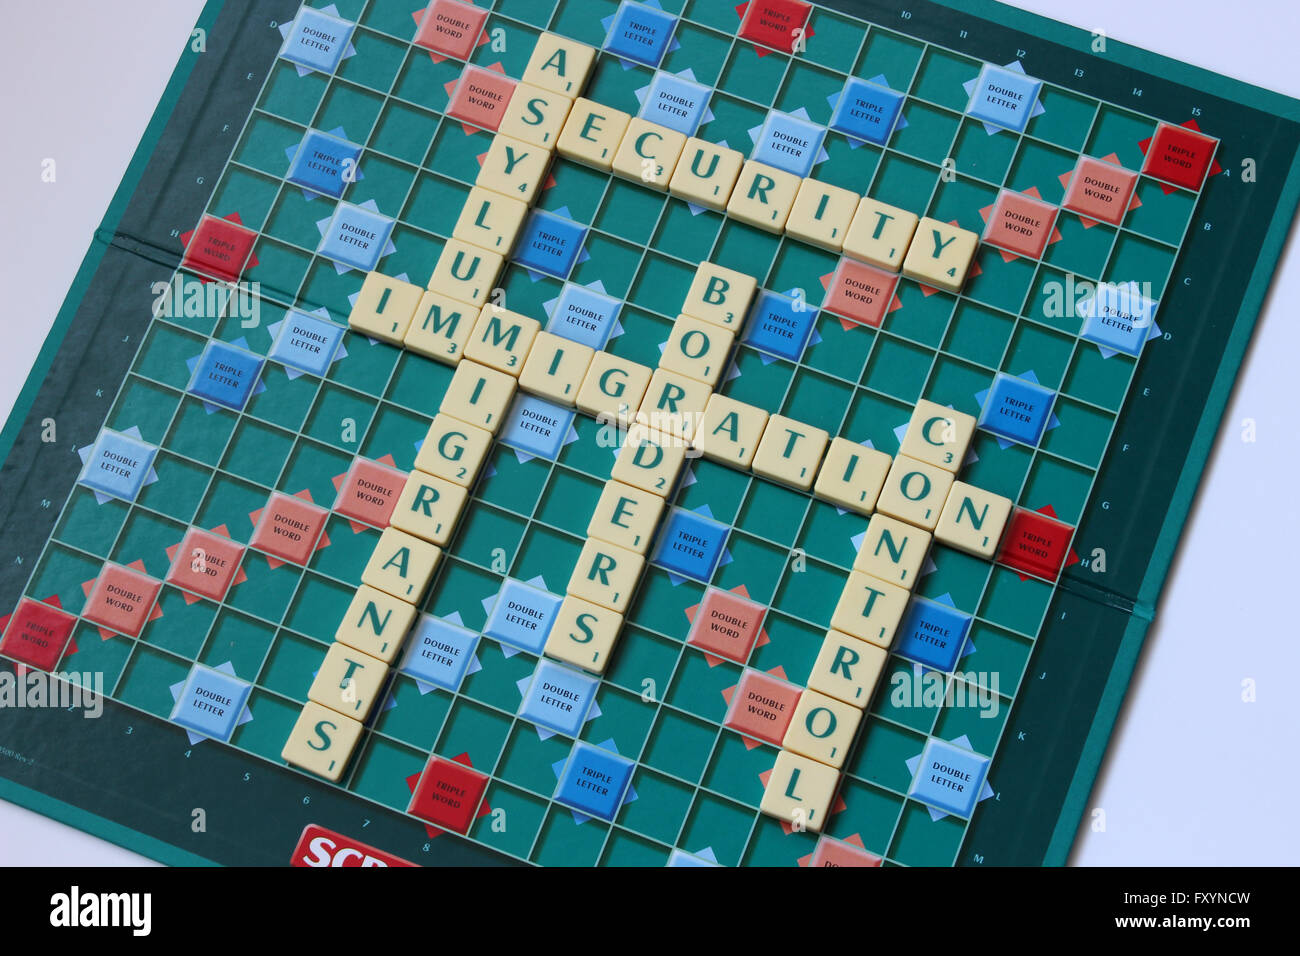 A Scrabble board with words about immigration Stock Photo